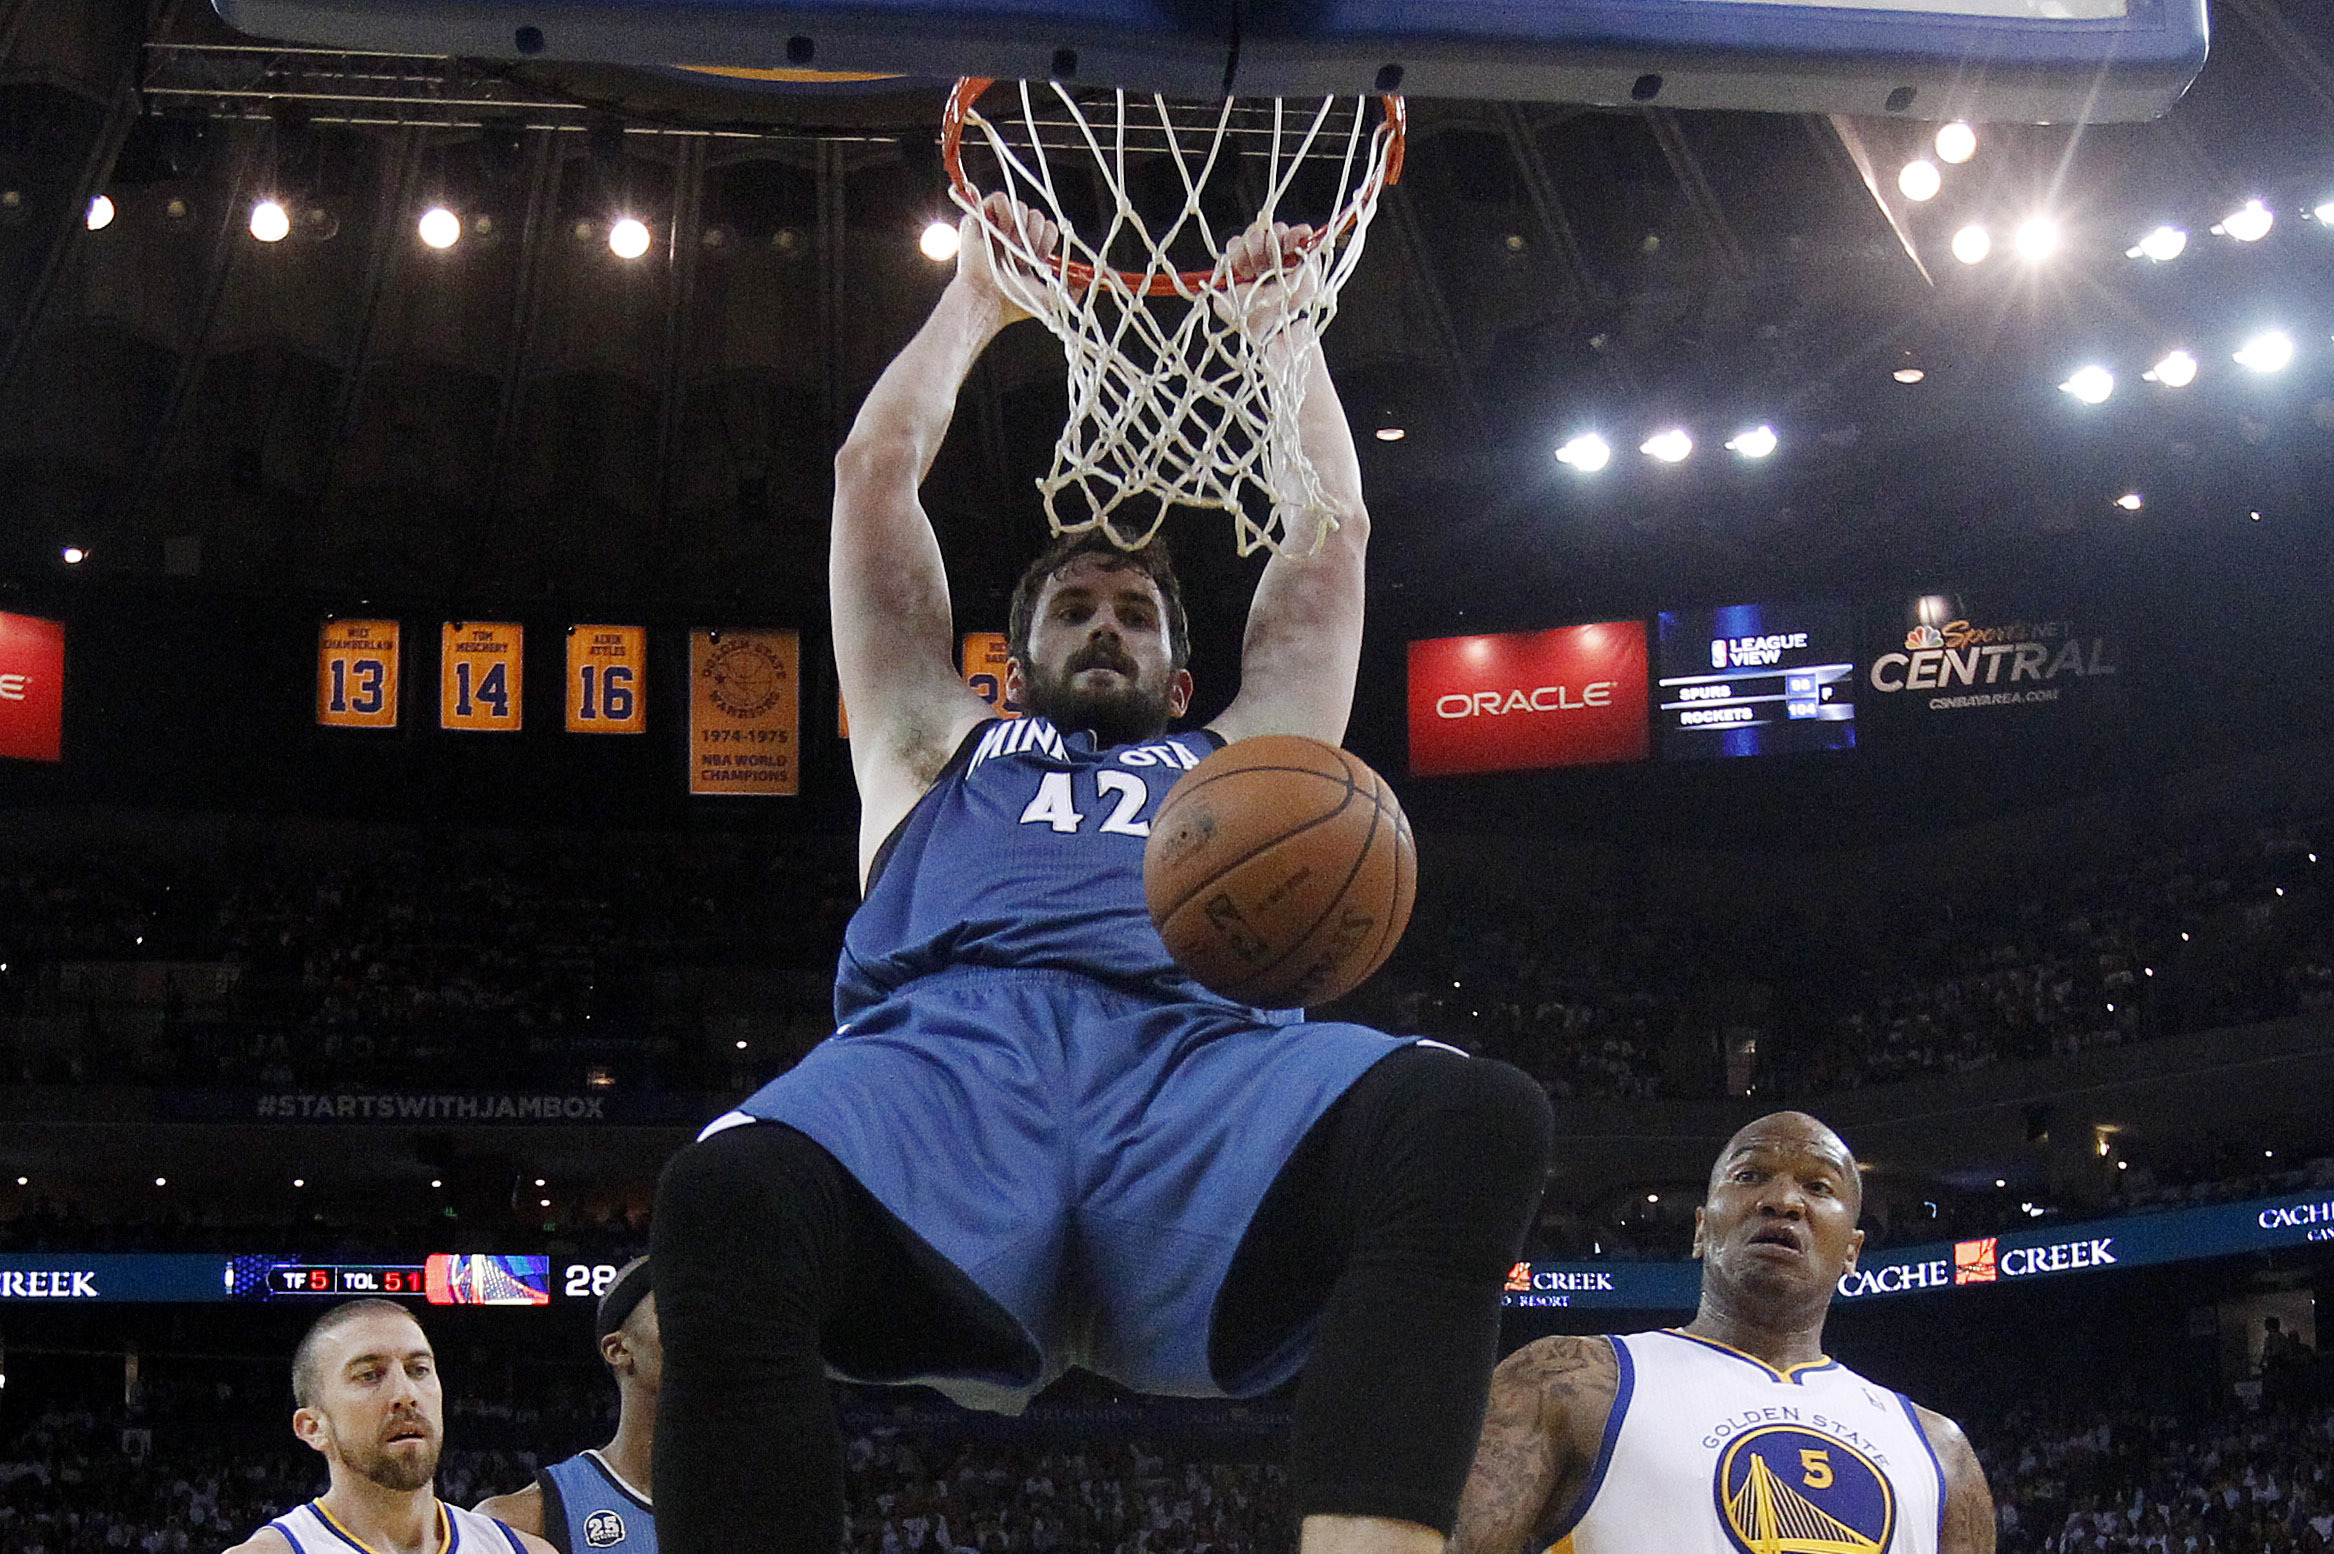 Kevin Love Sets Minnesota Timberwolves Record for Most Points in a